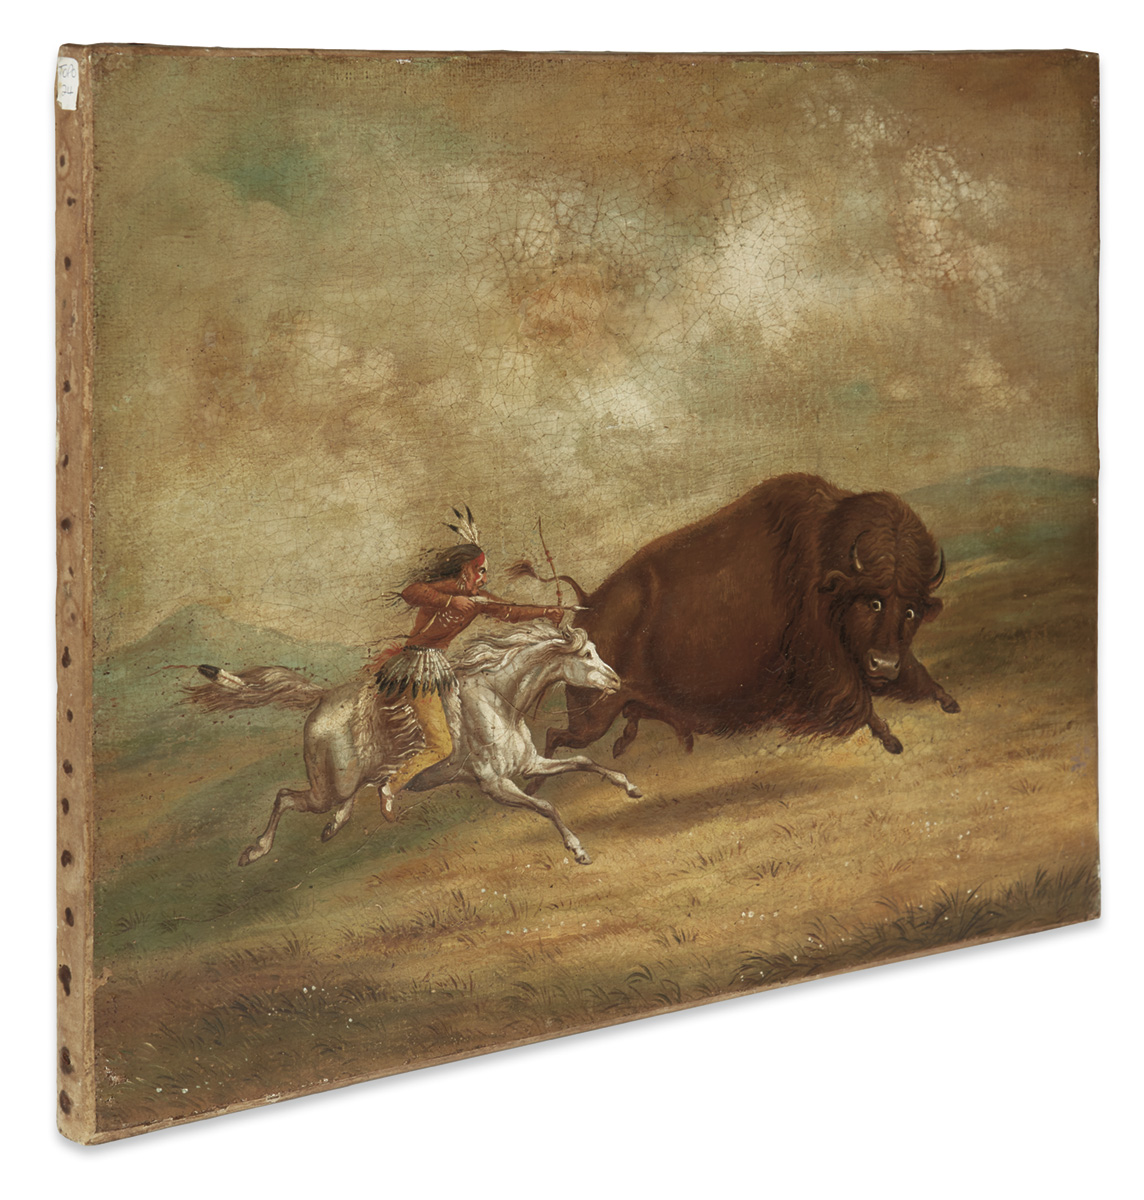 CATLIN, GEORGE, after. [Buffalo Hunt, Chase].